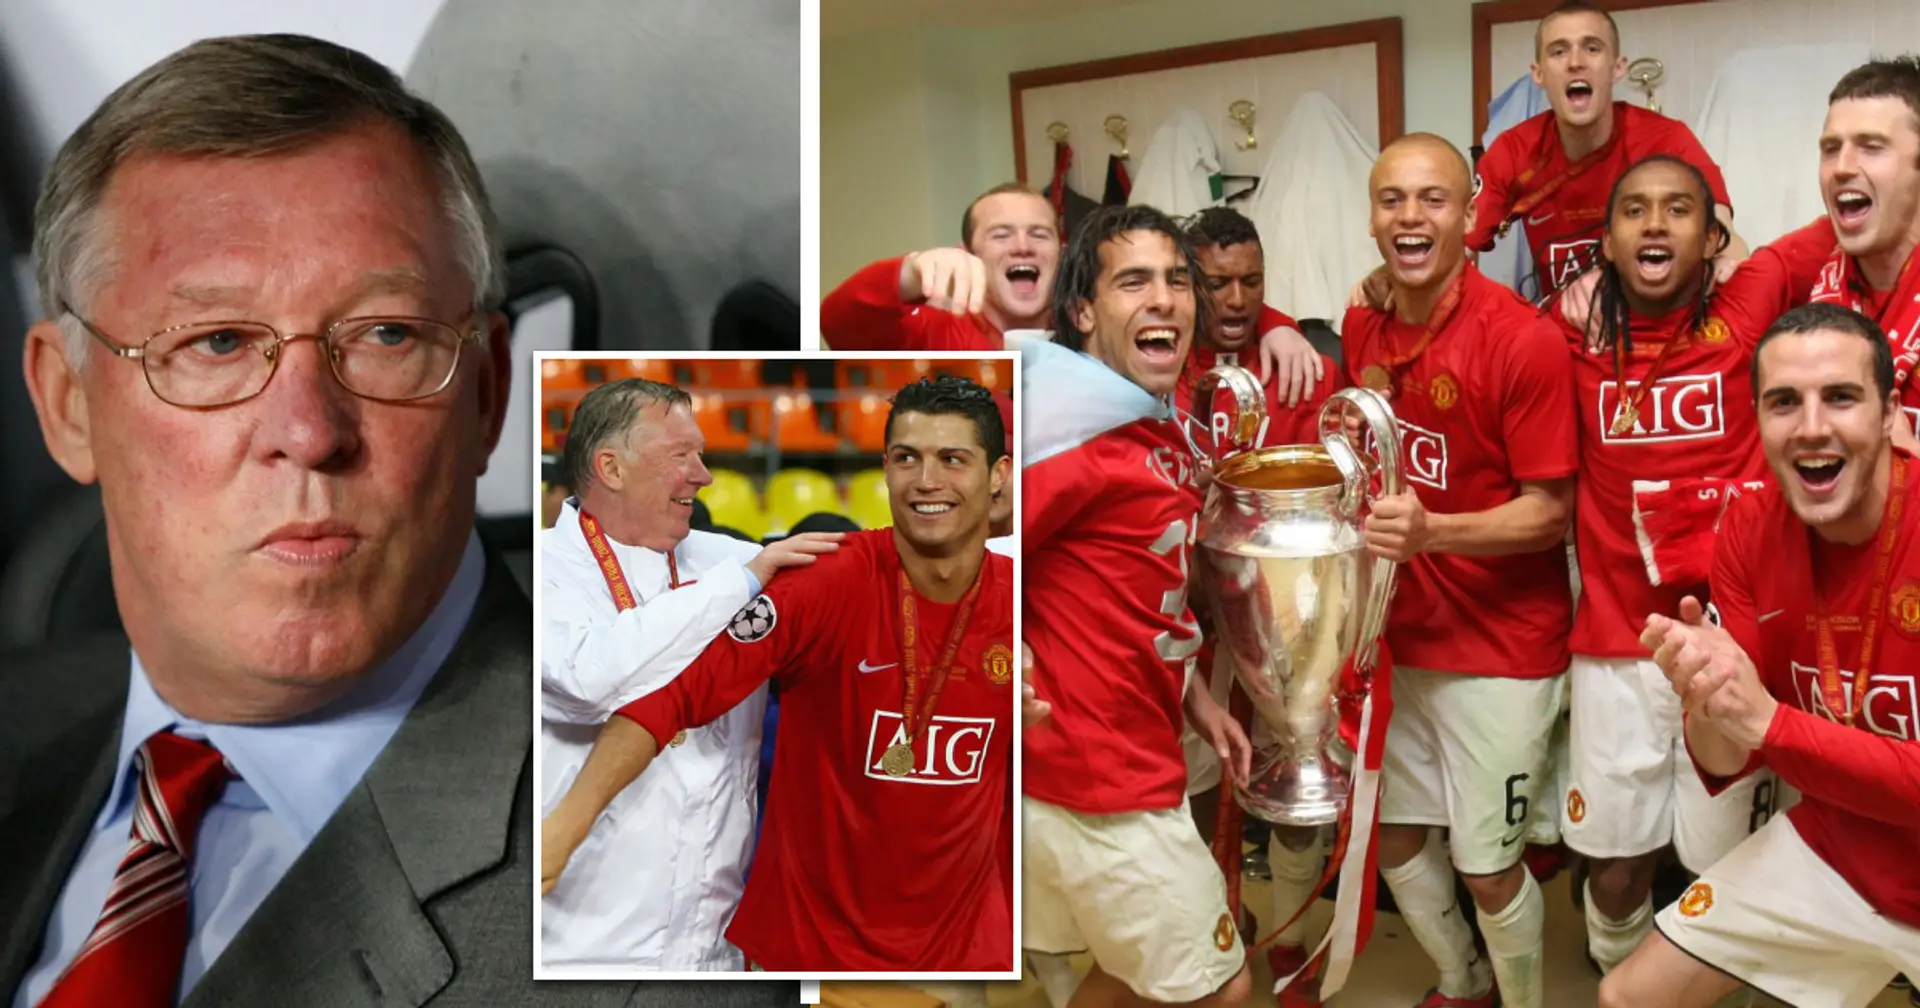 'I’ve already won. We don’t even need to play this game':  Sir Alex Ferguson's greatest team talk before iconic win